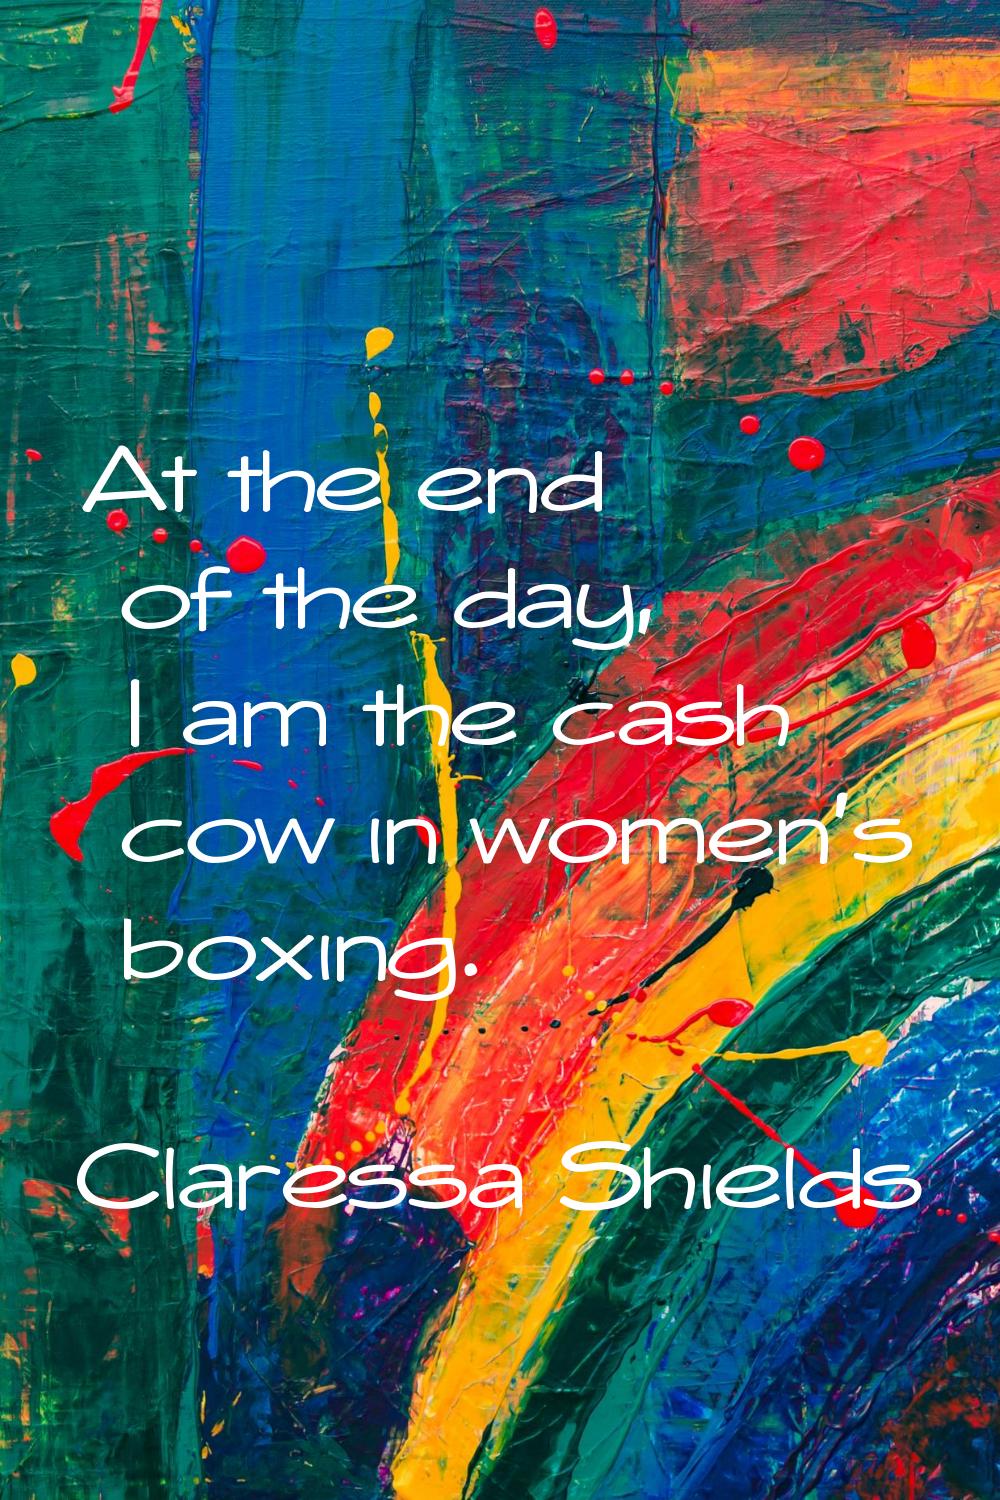 At the end of the day, I am the cash cow in women's boxing.